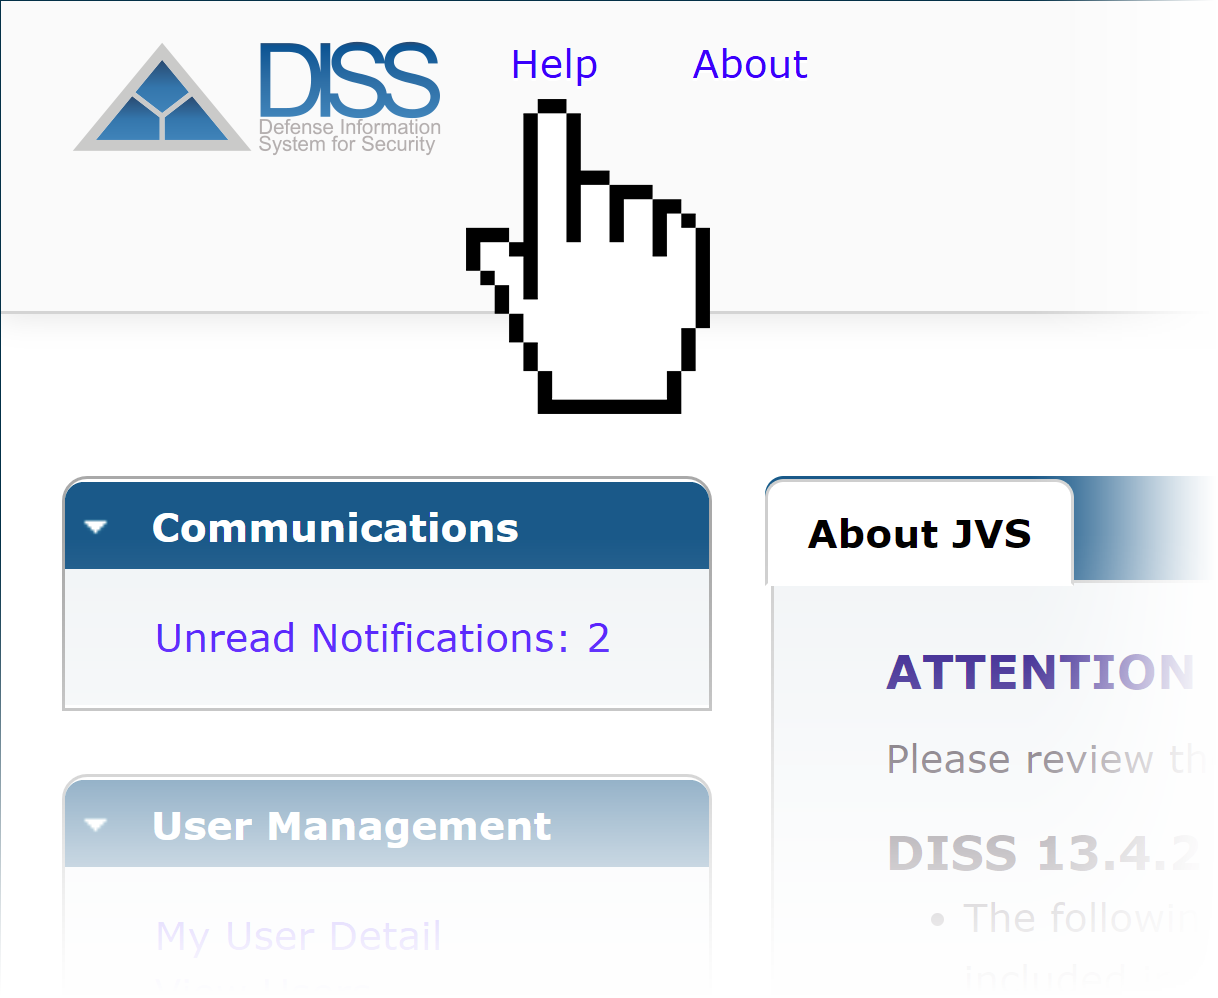 DISS Help section button